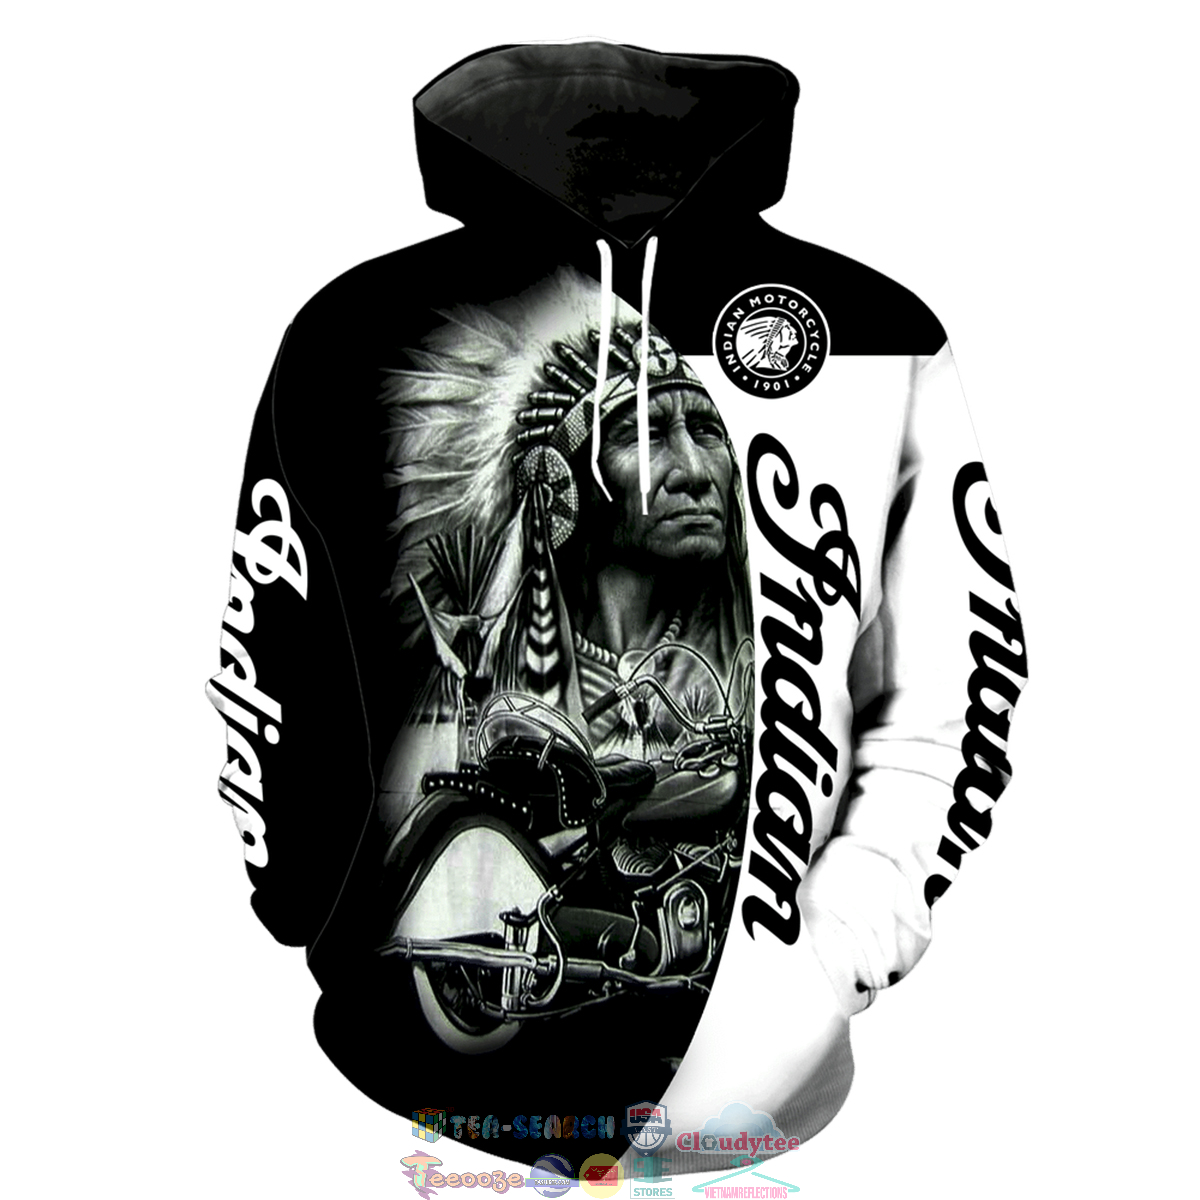 Indian Motorcycle ver 6 3D hoodie and t-shirt